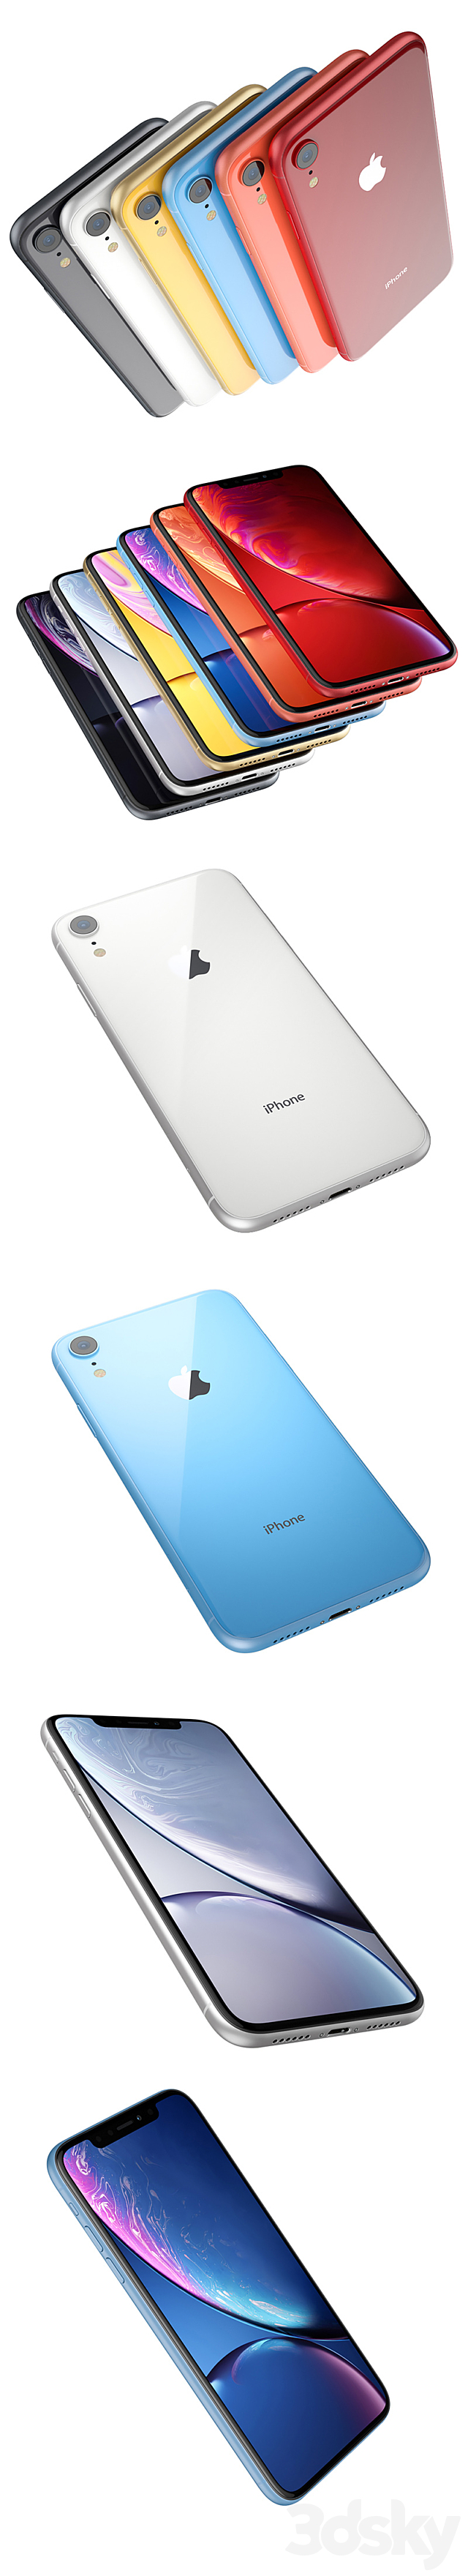 Apple iPhone Xr All colors 3DSMax File - thumbnail 2